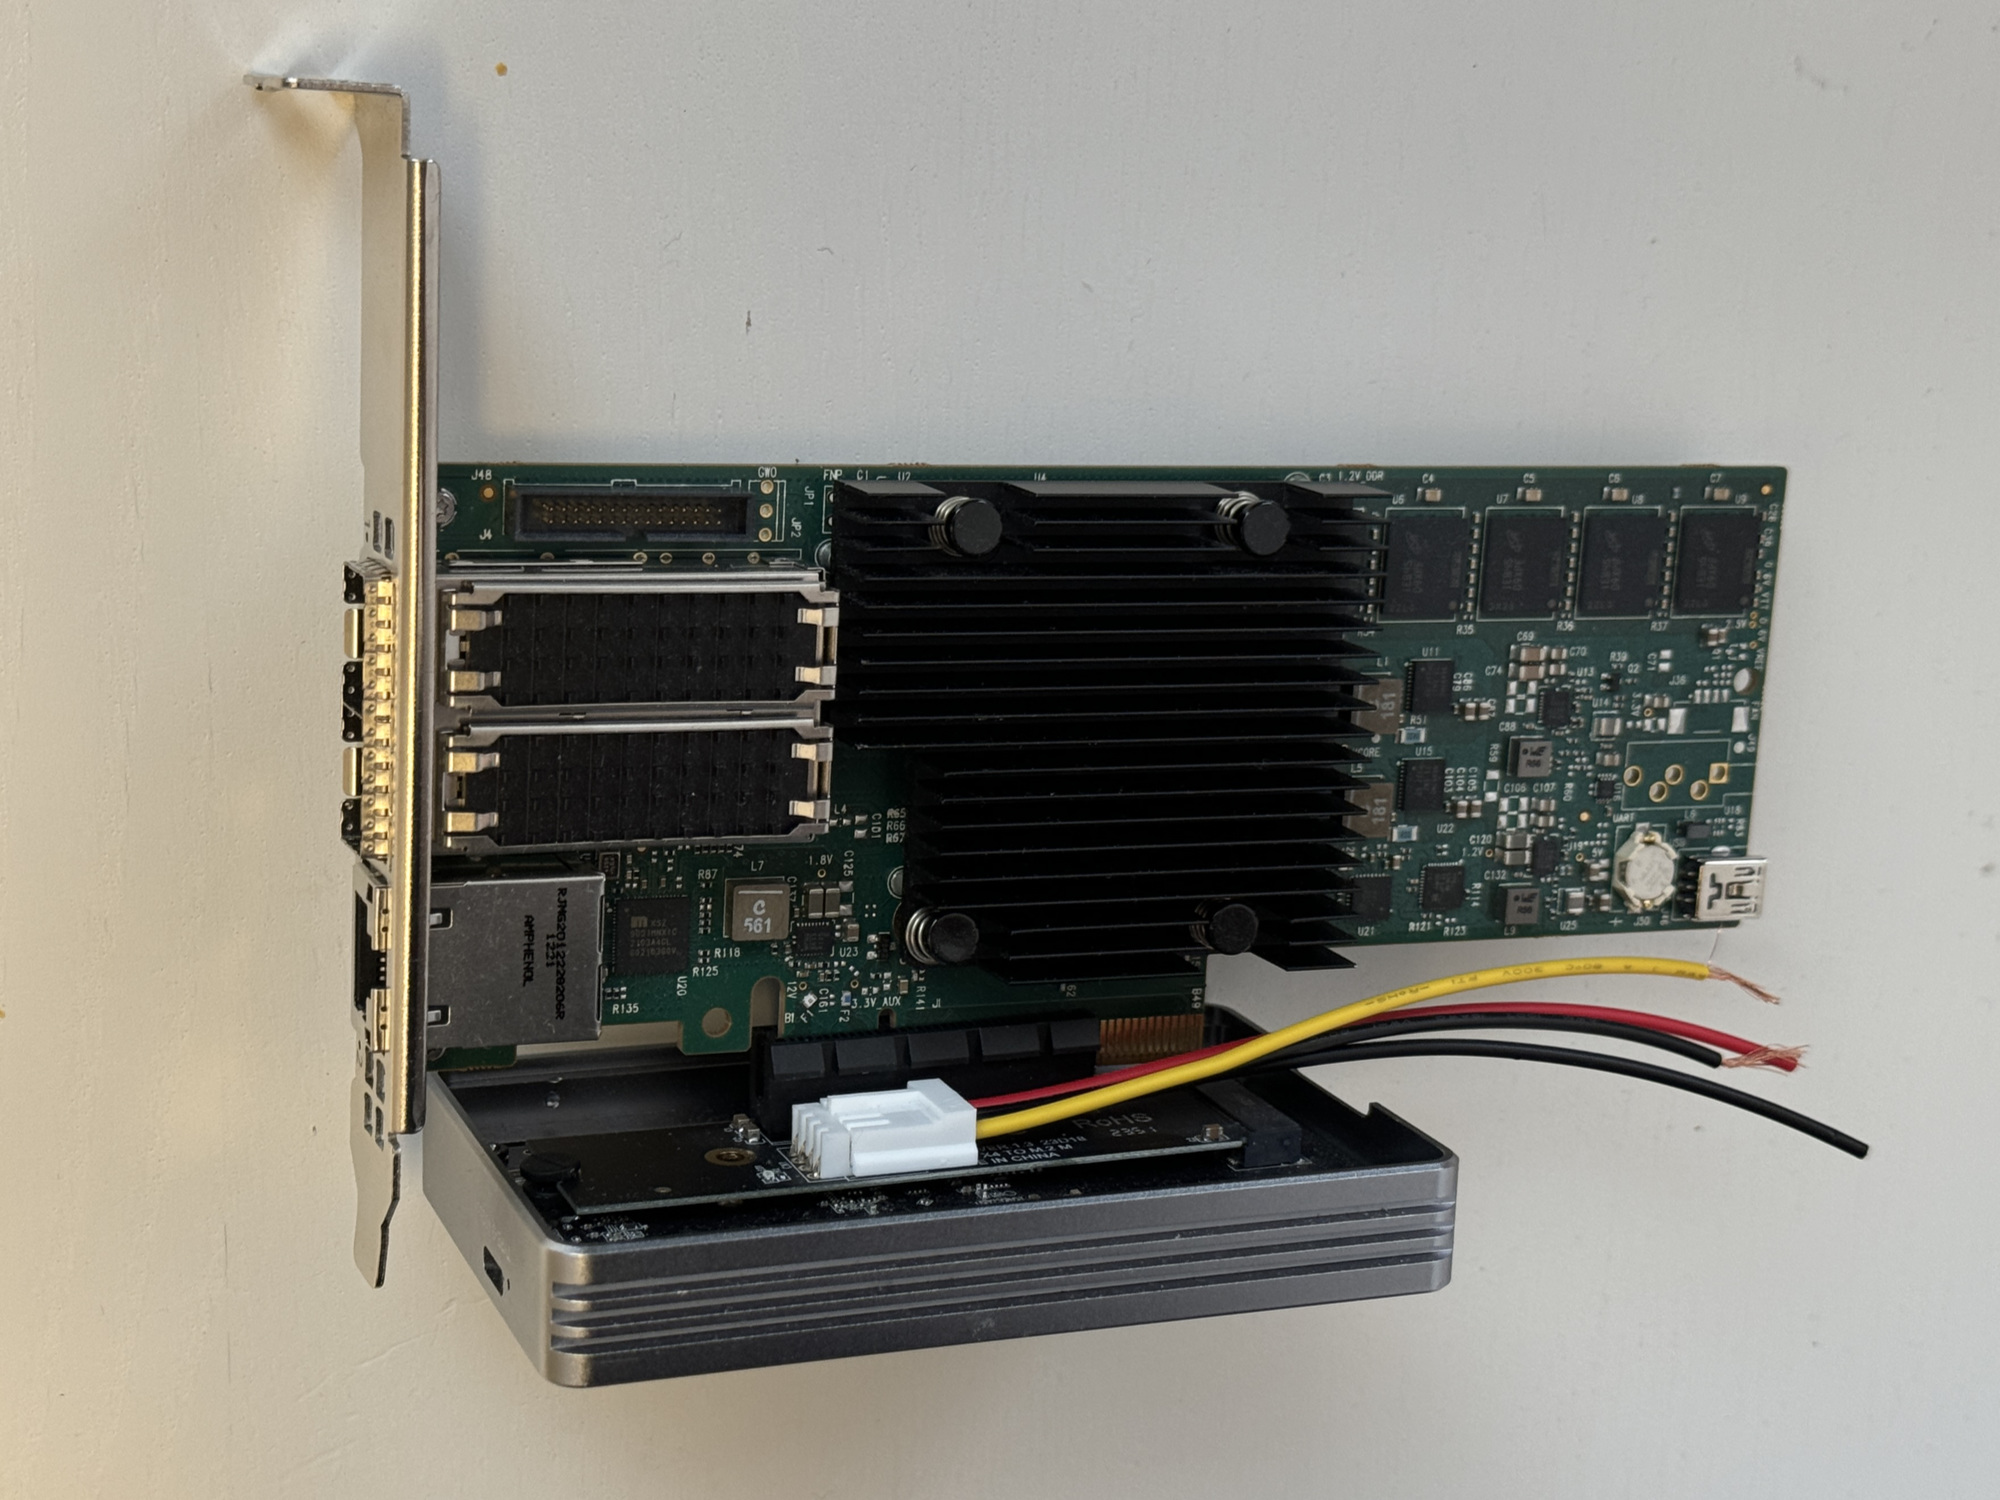 ConnectX-6 network card in a PCIe->M.2 adapter in a TBU401 Thunderbolt enclosure